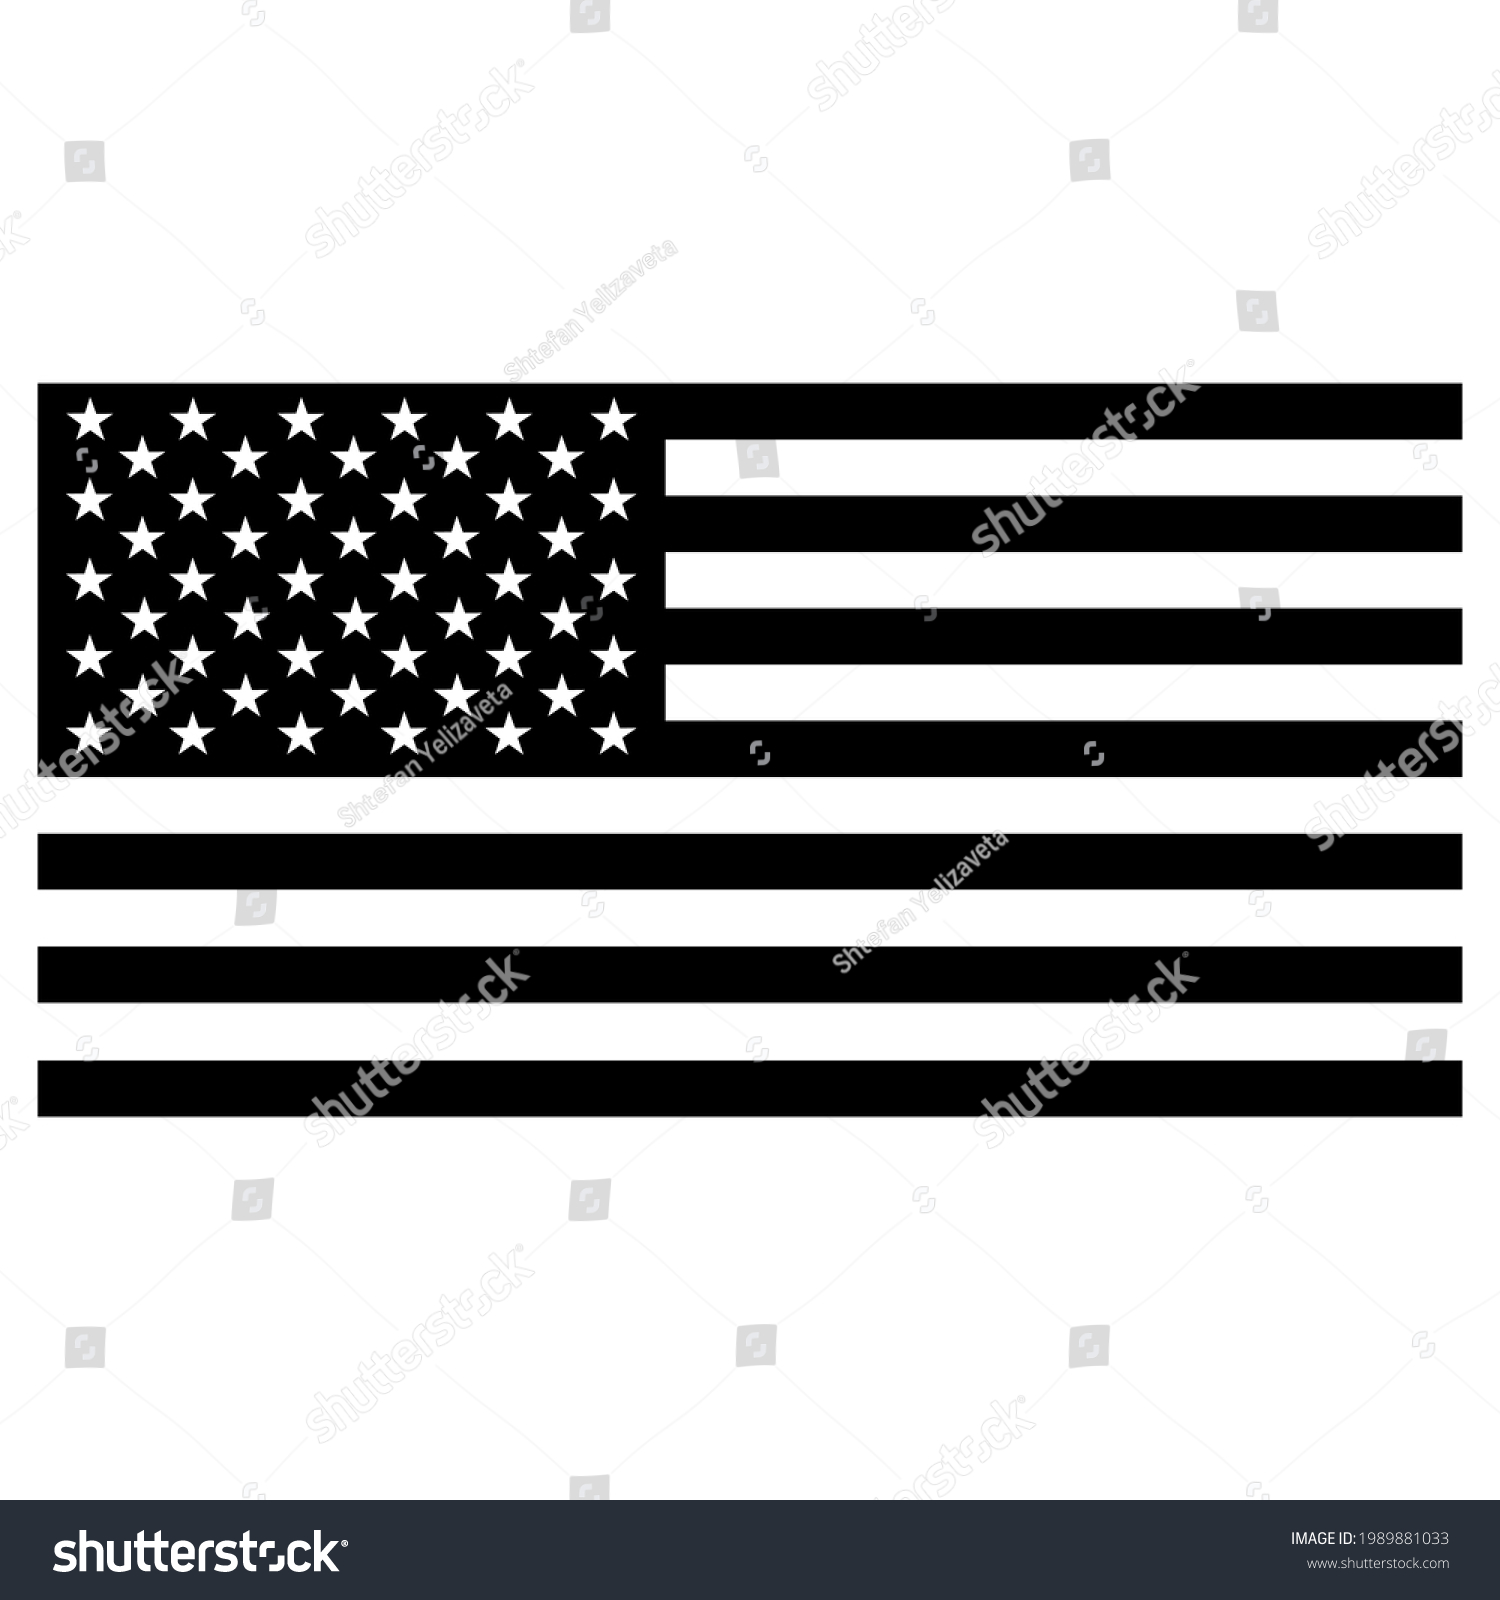 SVG of Vector black and white USA flag, isolated on white background. For cutting svg